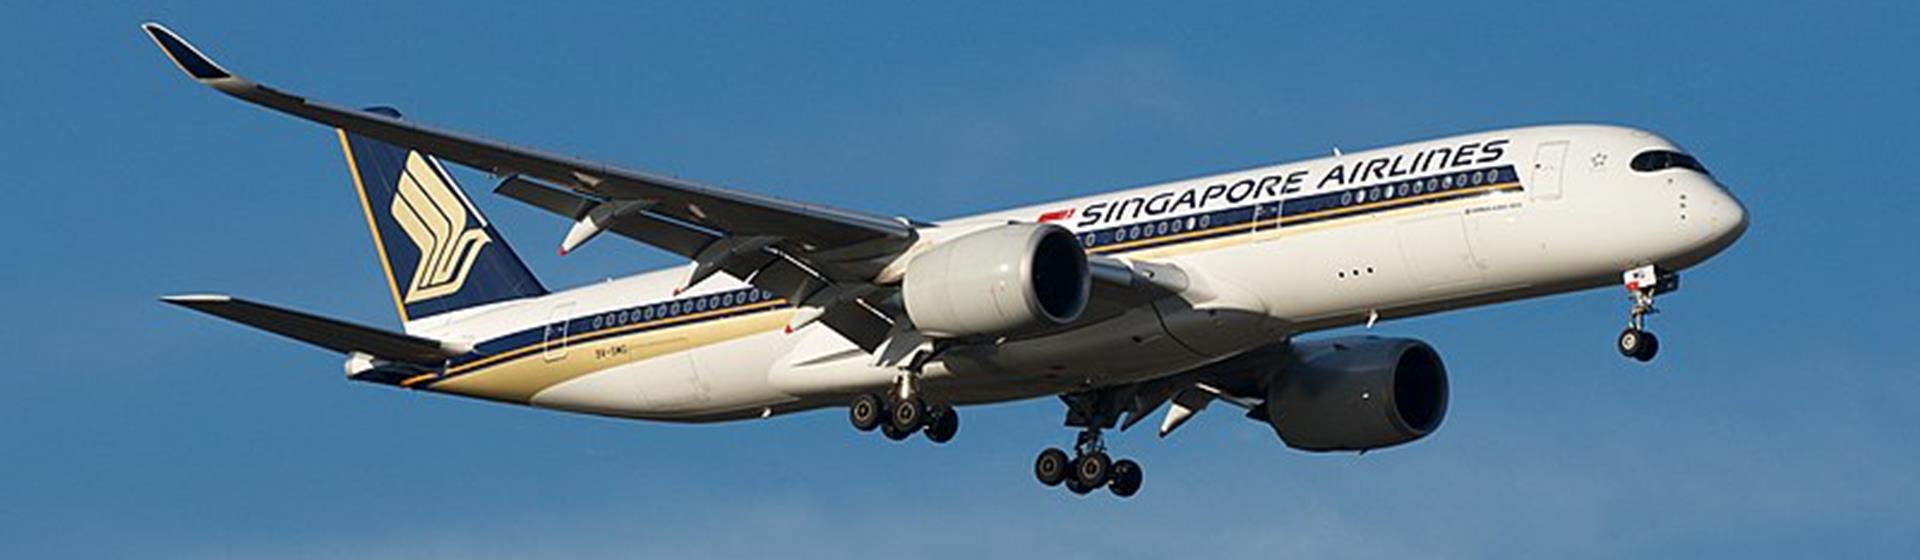 Singapore Airlines Flights 